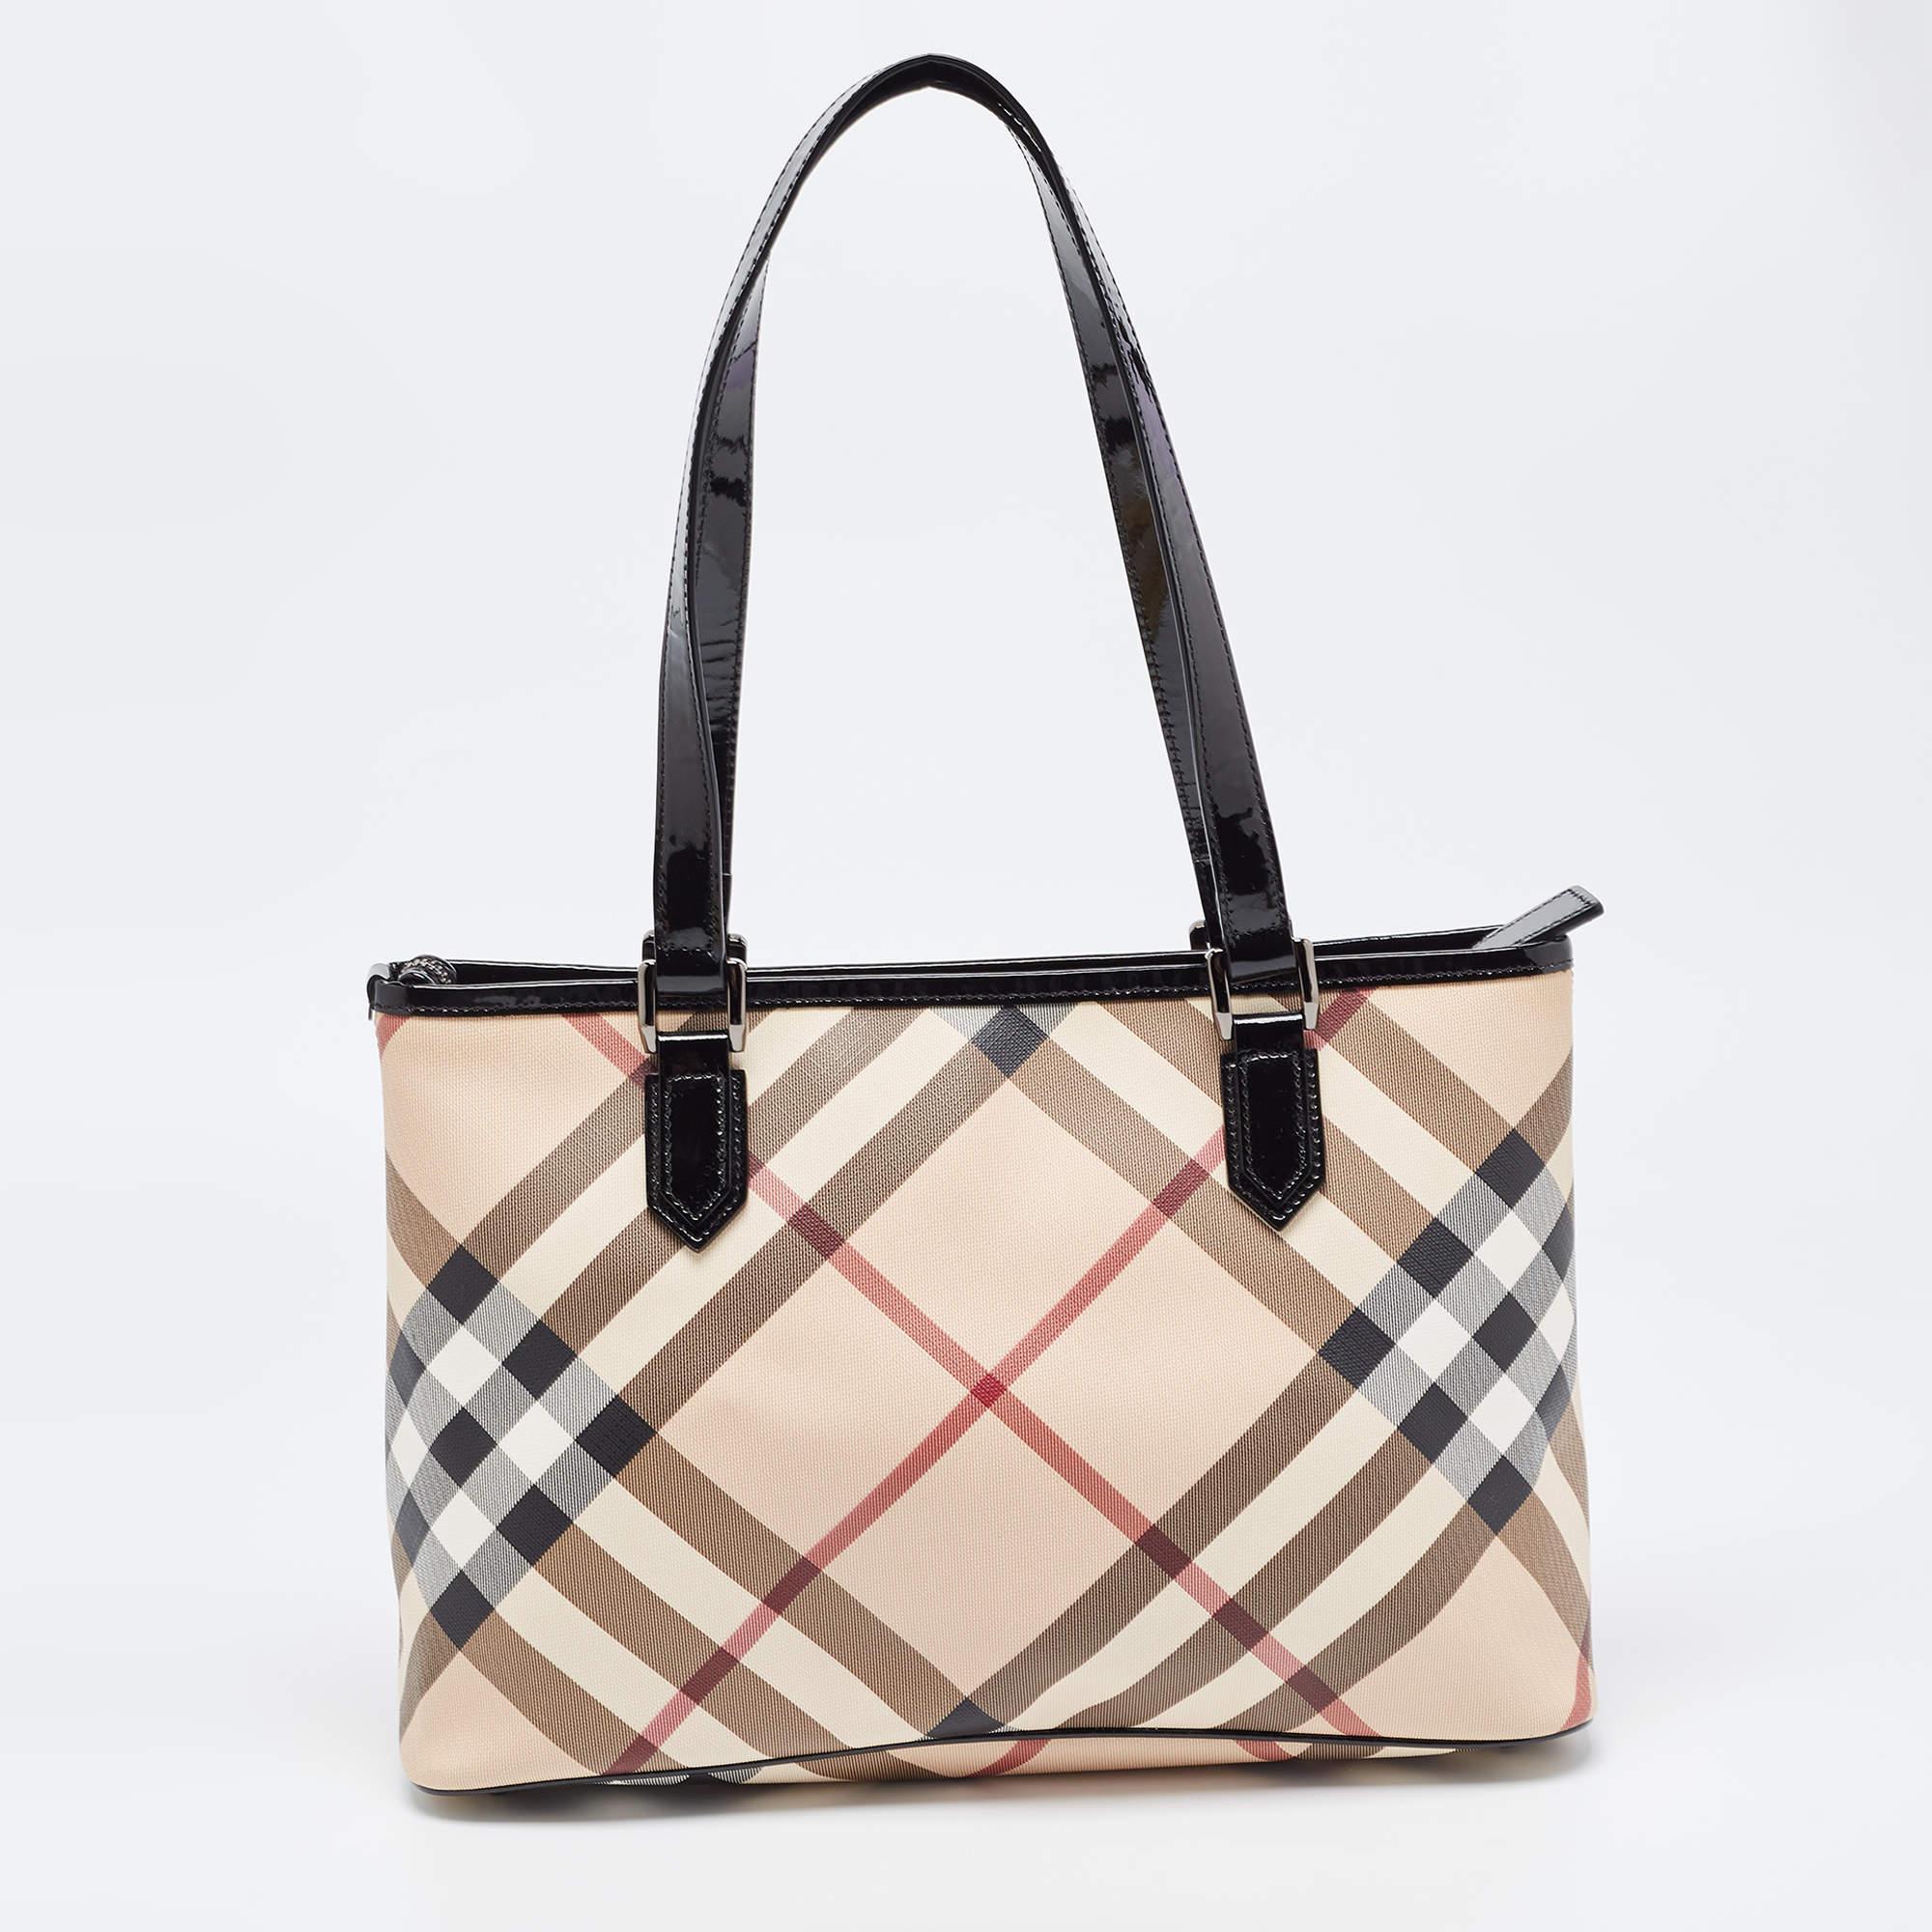 Women's Burberry Black/Beige Super Nova Check PVC and Patent Leather Nickie Tote